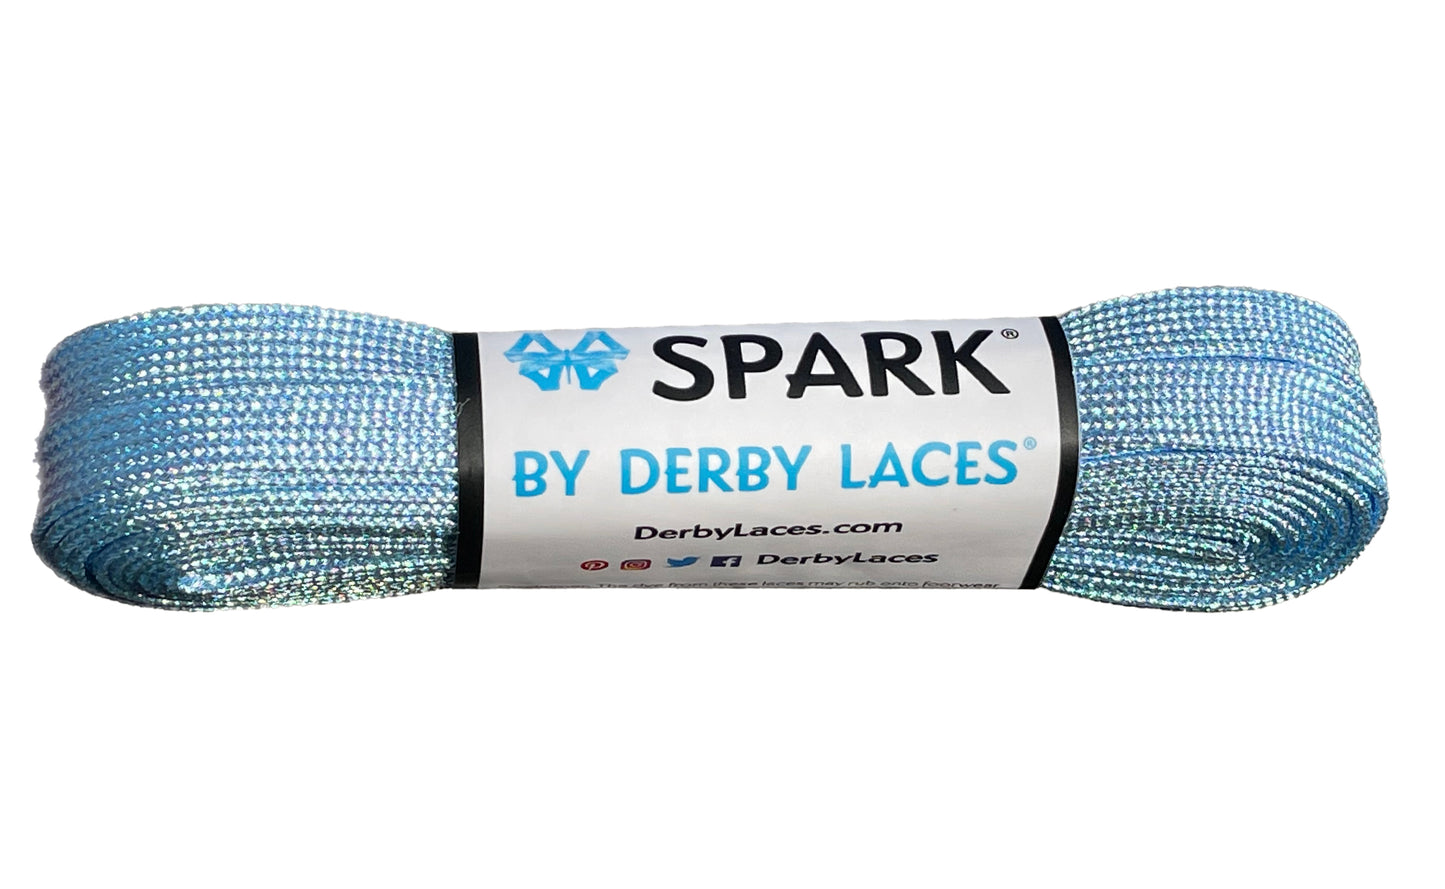 Aquamarine 96 inch (244 cm) SPARK by Derby Laces Metallic Roller Derby Skate Lace